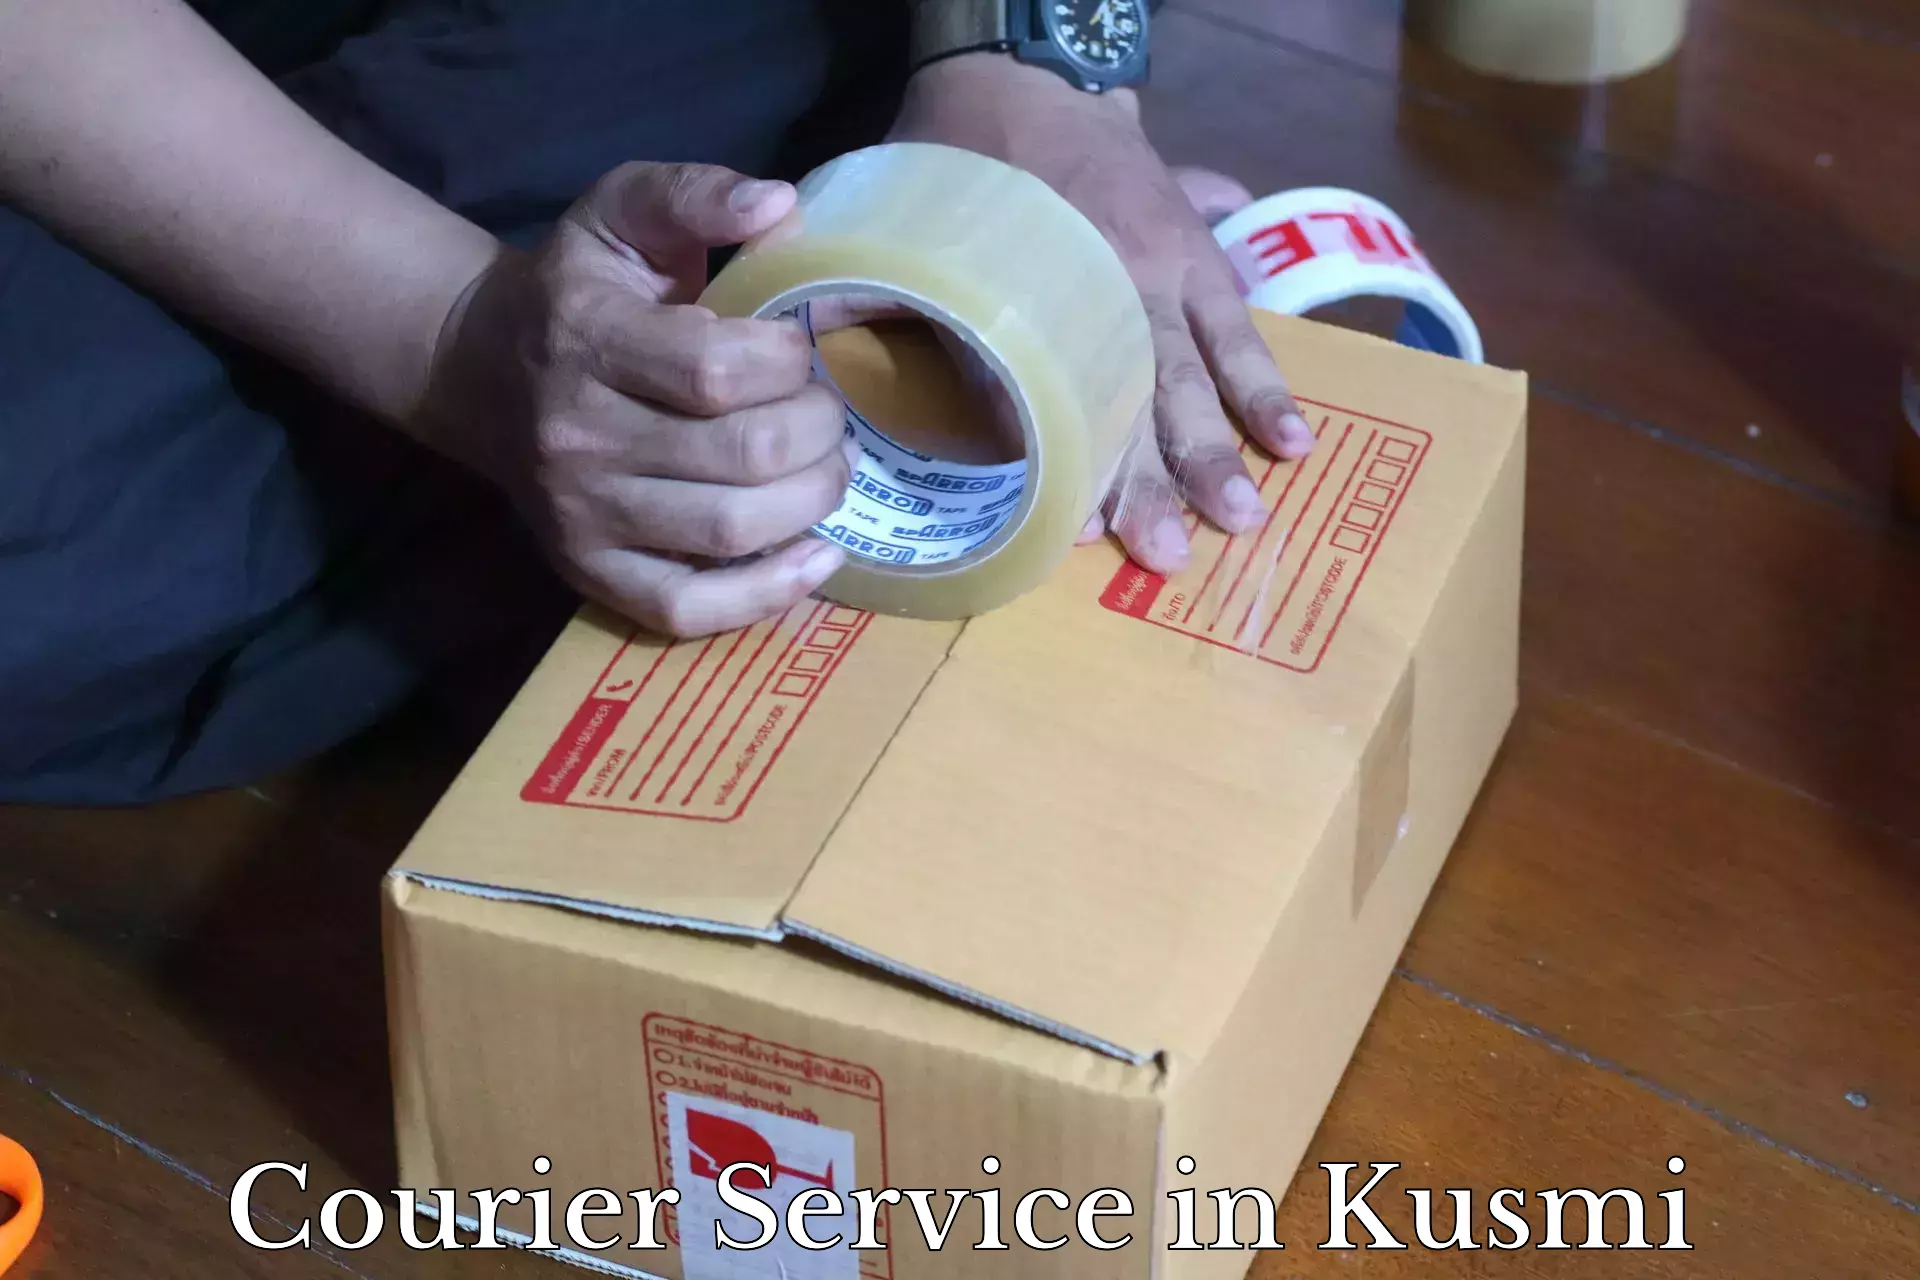 Innovative shipping solutions in Kusmi